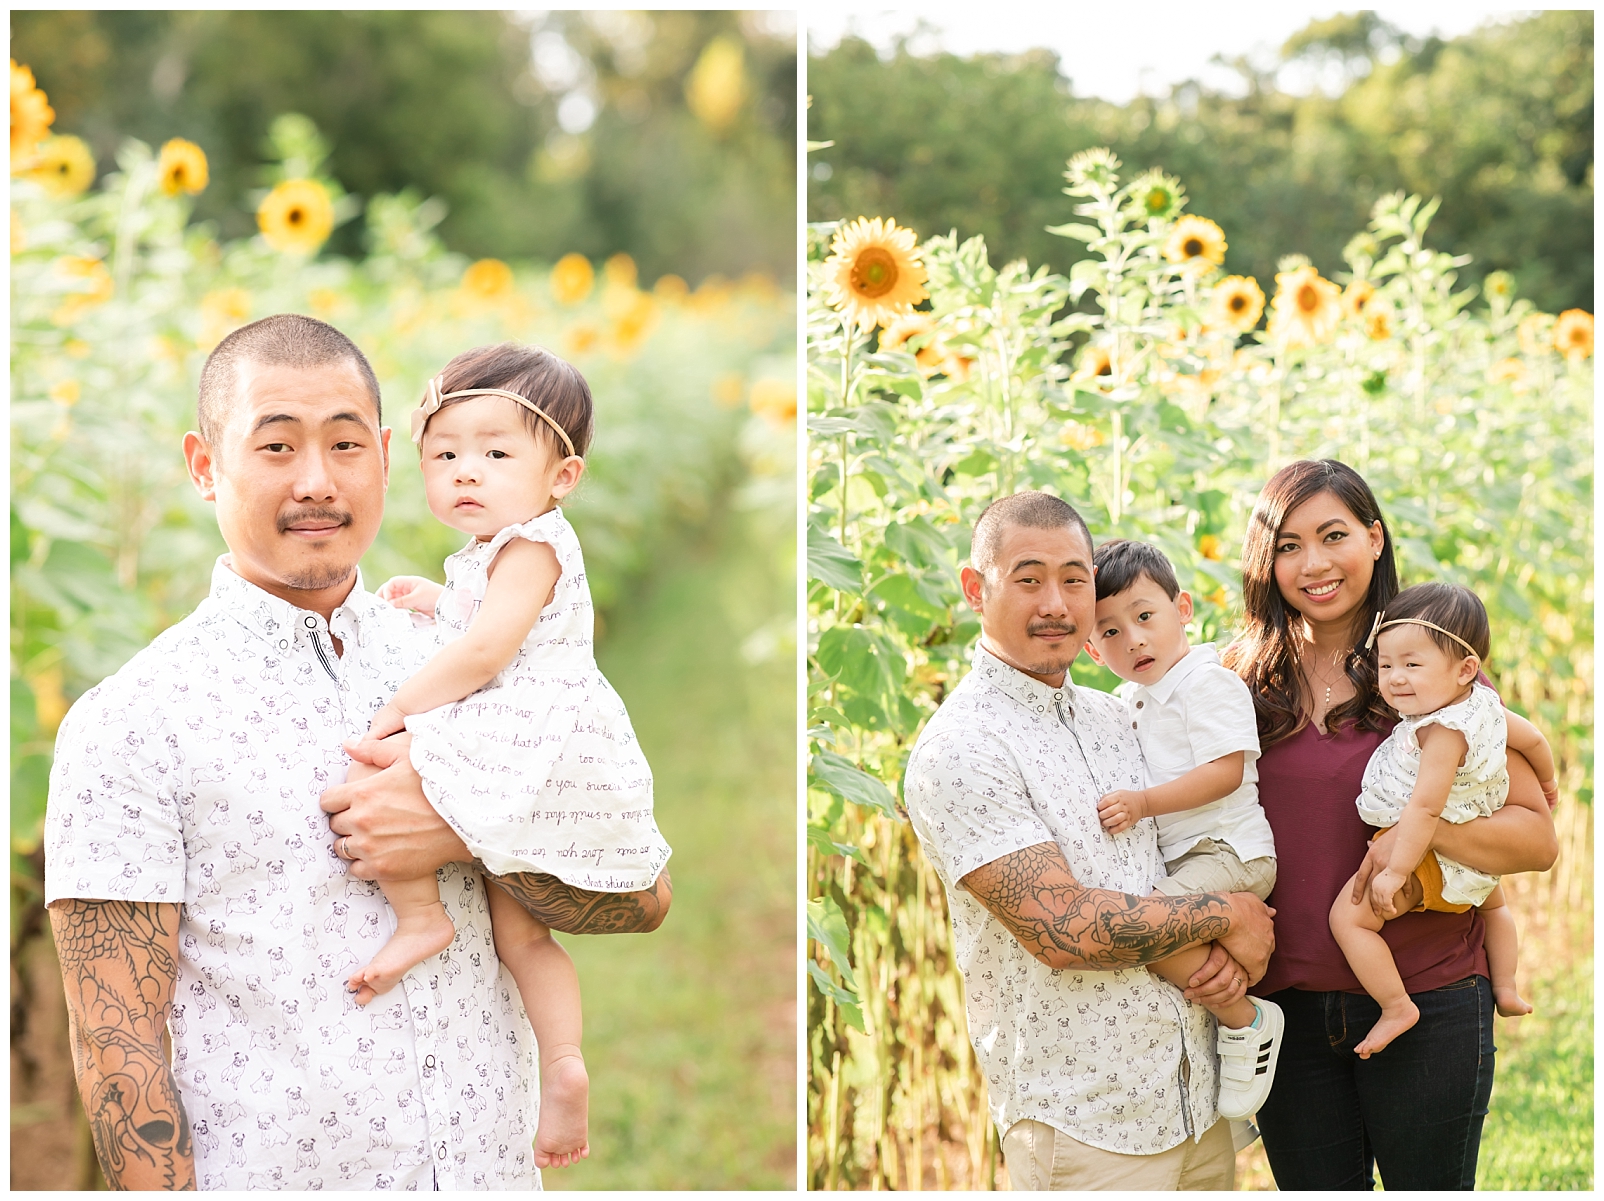 Sunflower portraits with a family